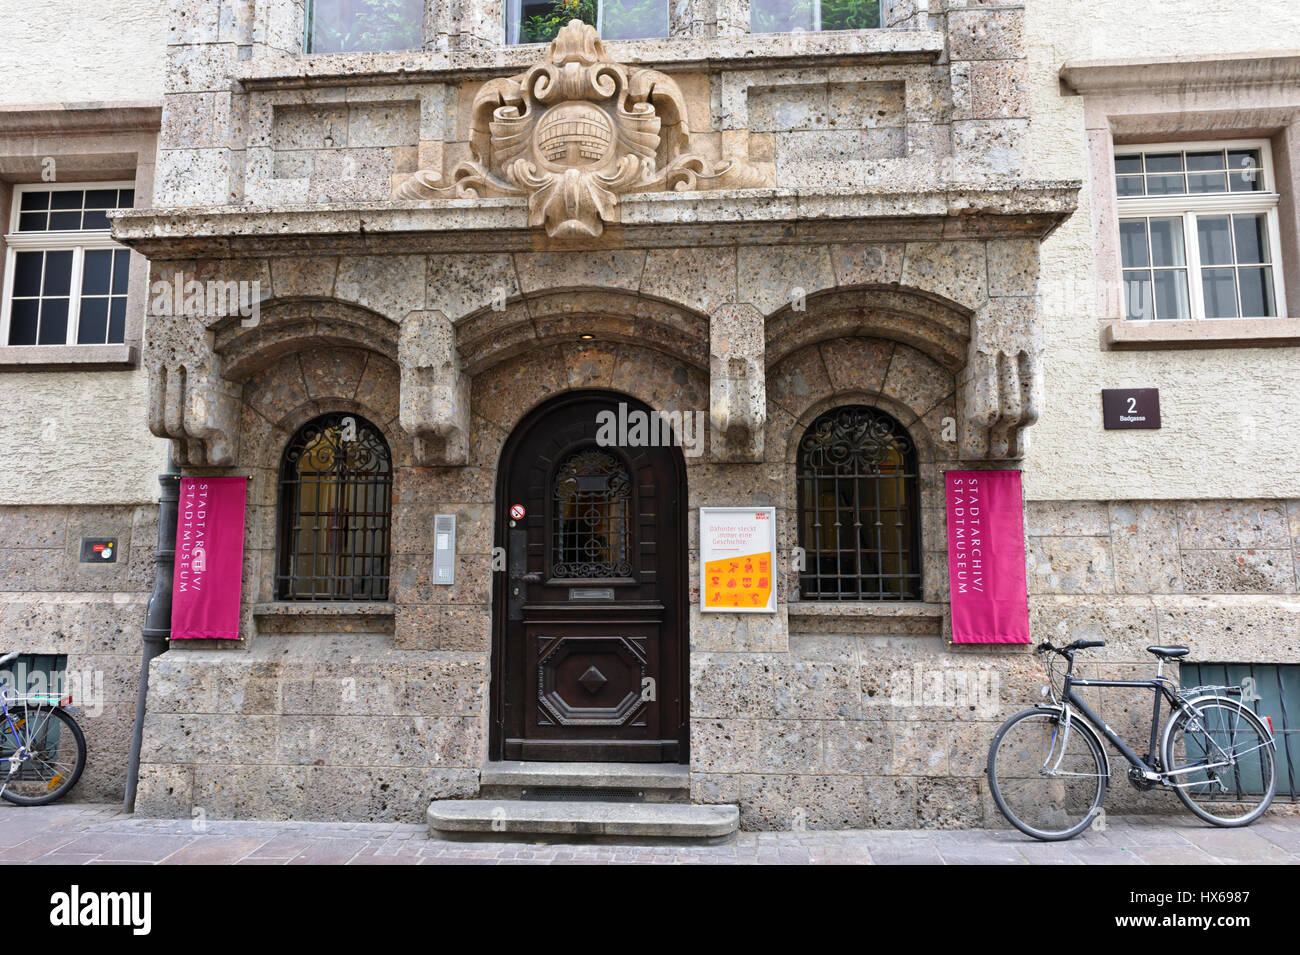 The entrance to the Stadt Museum, Innsbruck, Austria Stock Photo